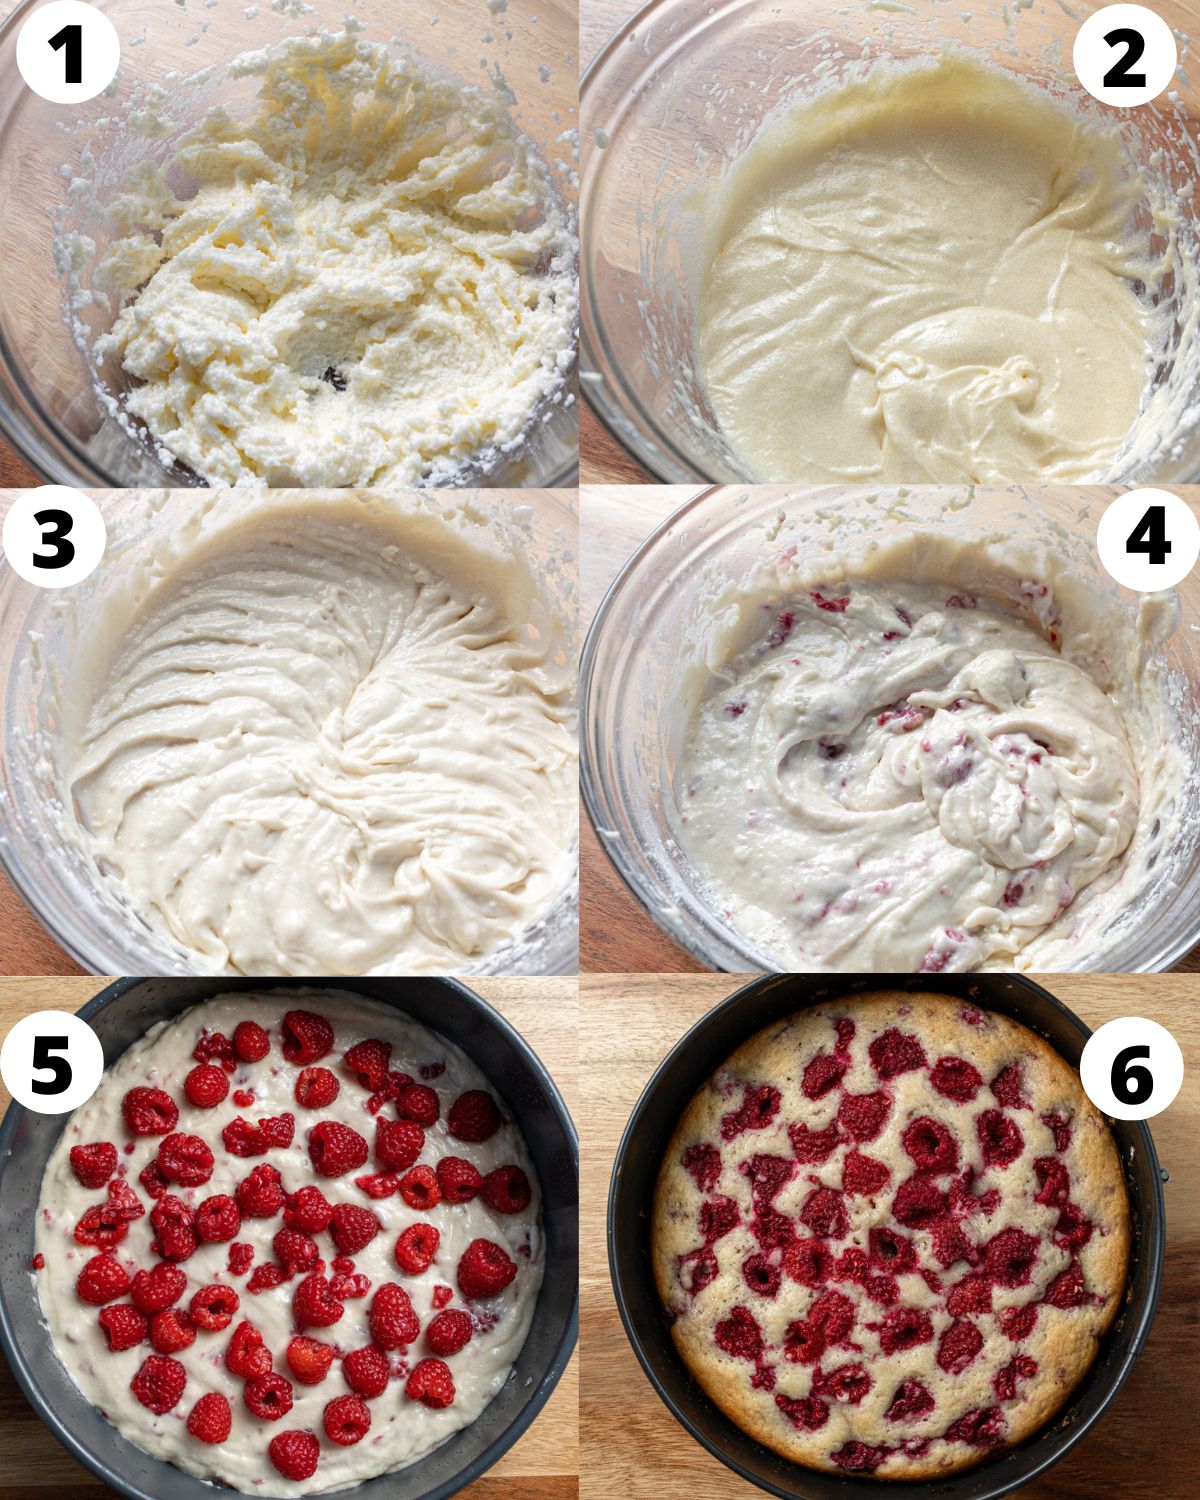 Raspberry cake instructions pictured in six steps